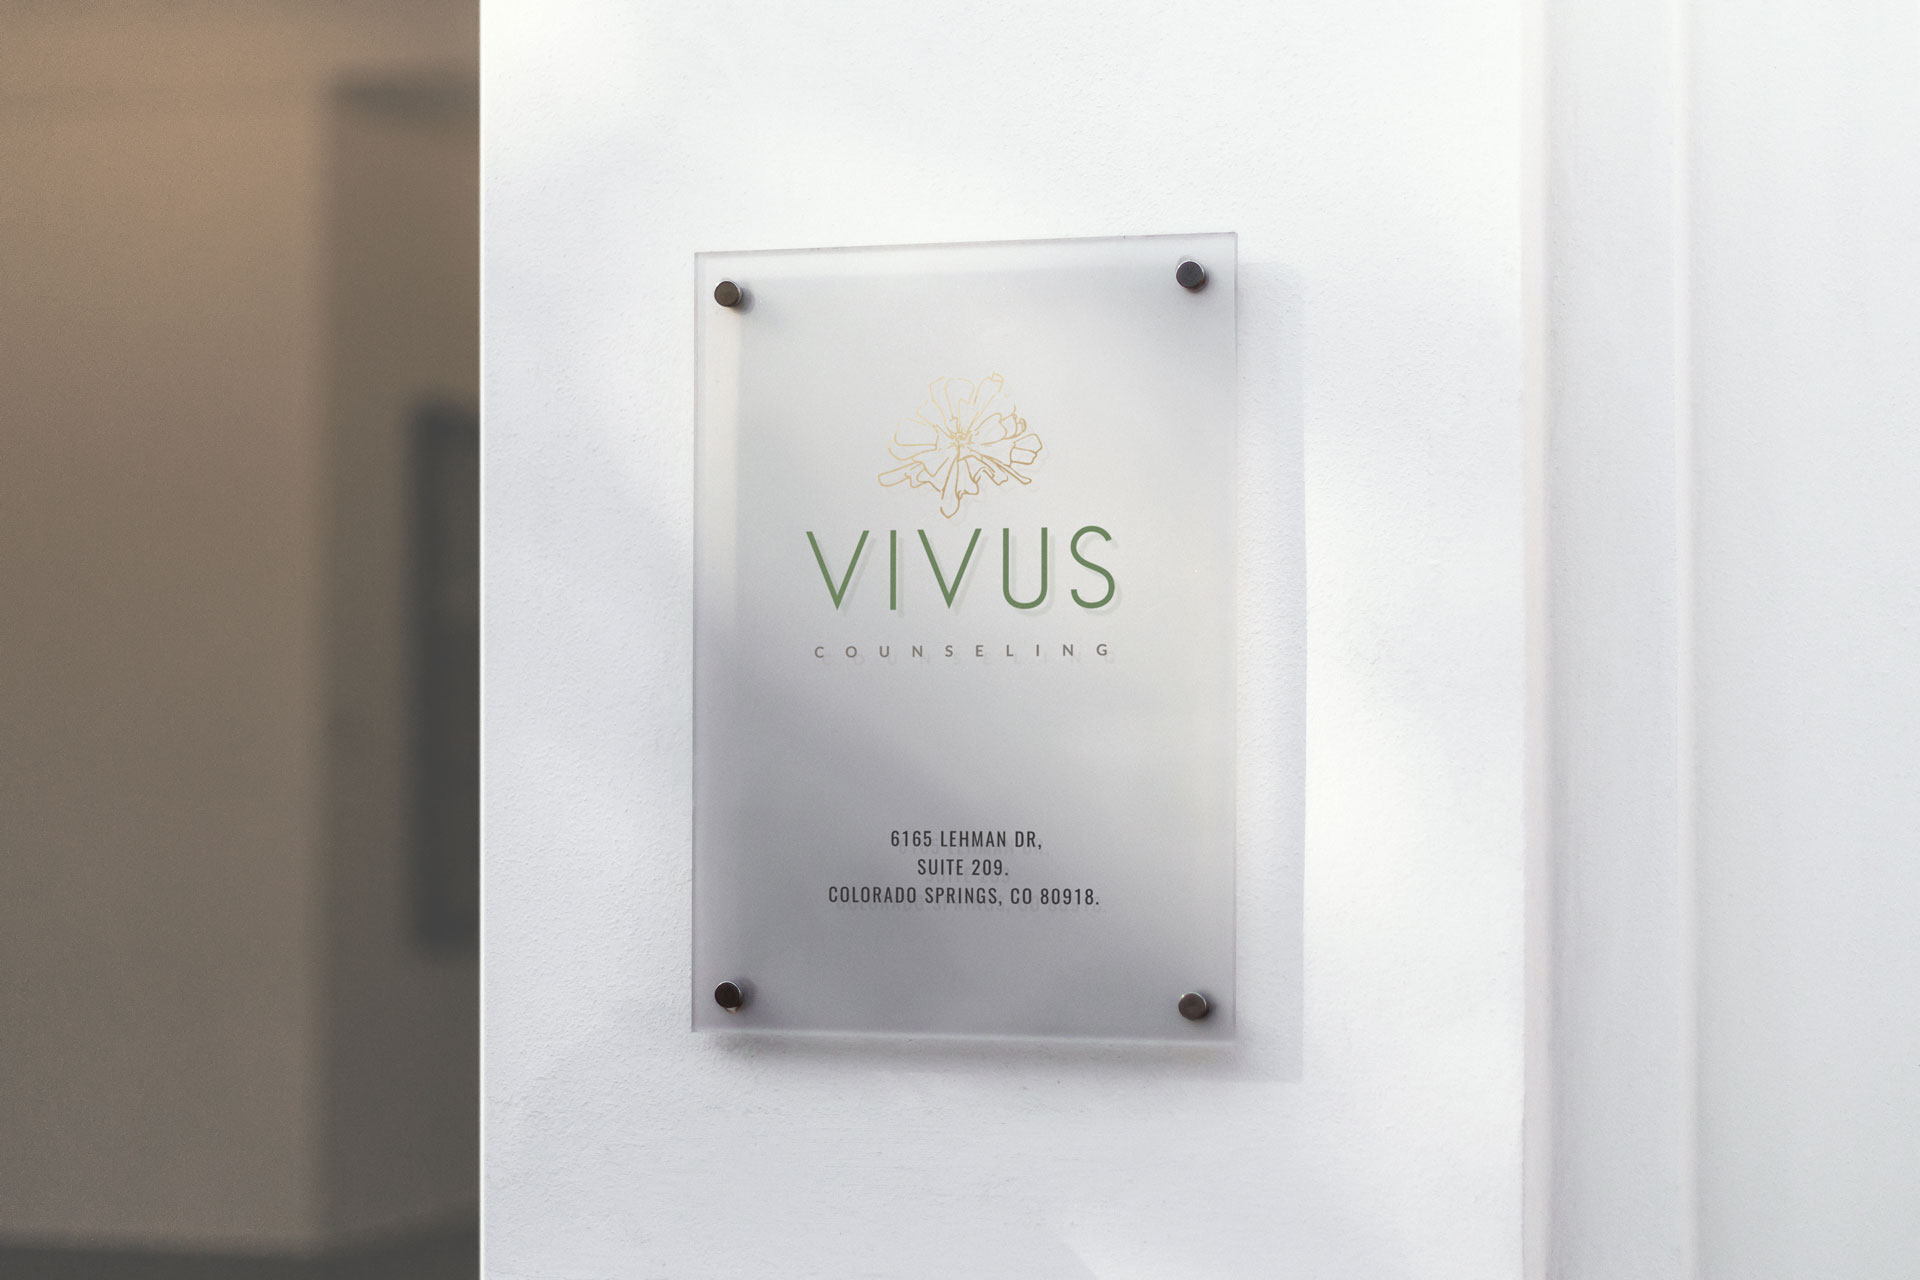 Brand signage - Vivus Counseling - Whiskey and Red Small Business Branding and Website Design Packages